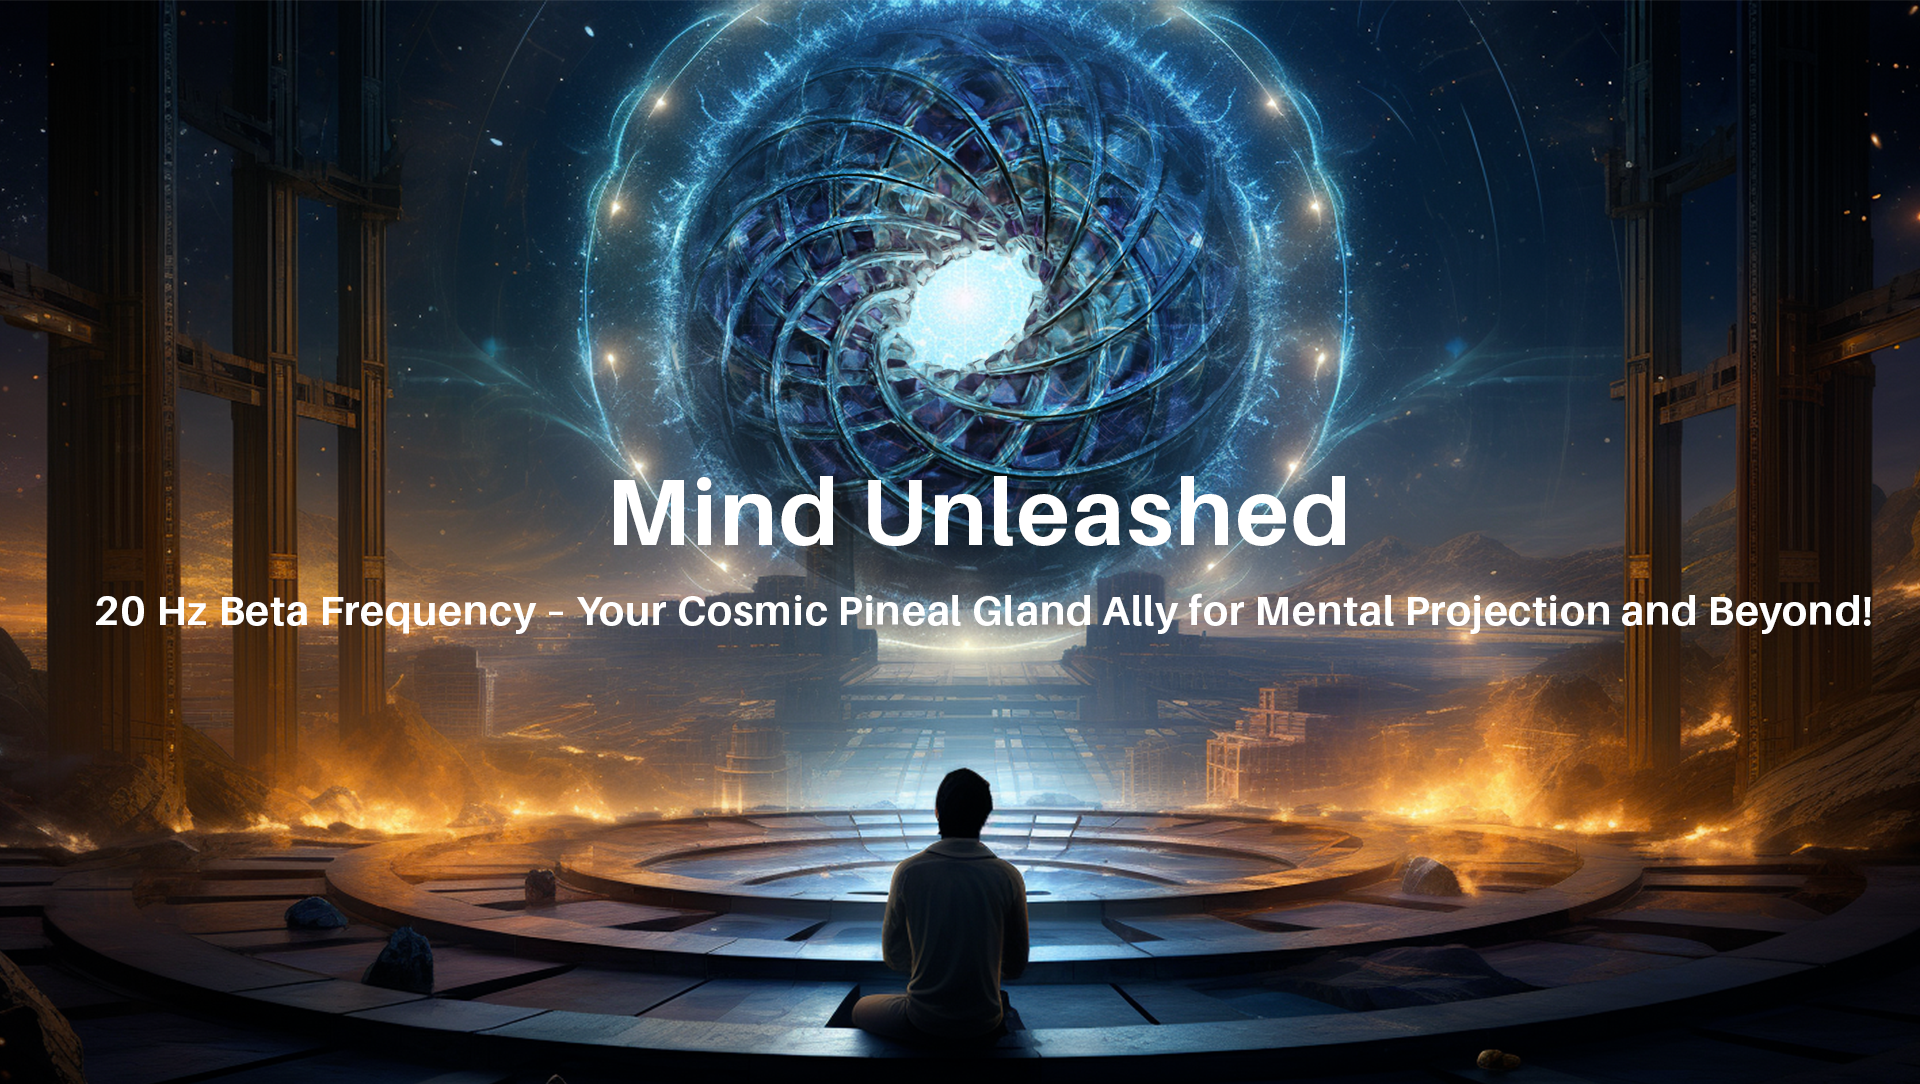 Mind Unleashed: 20 Hz Beta Frequency – Your Cosmic Pineal Gland Ally for Mental Projection and Beyond!